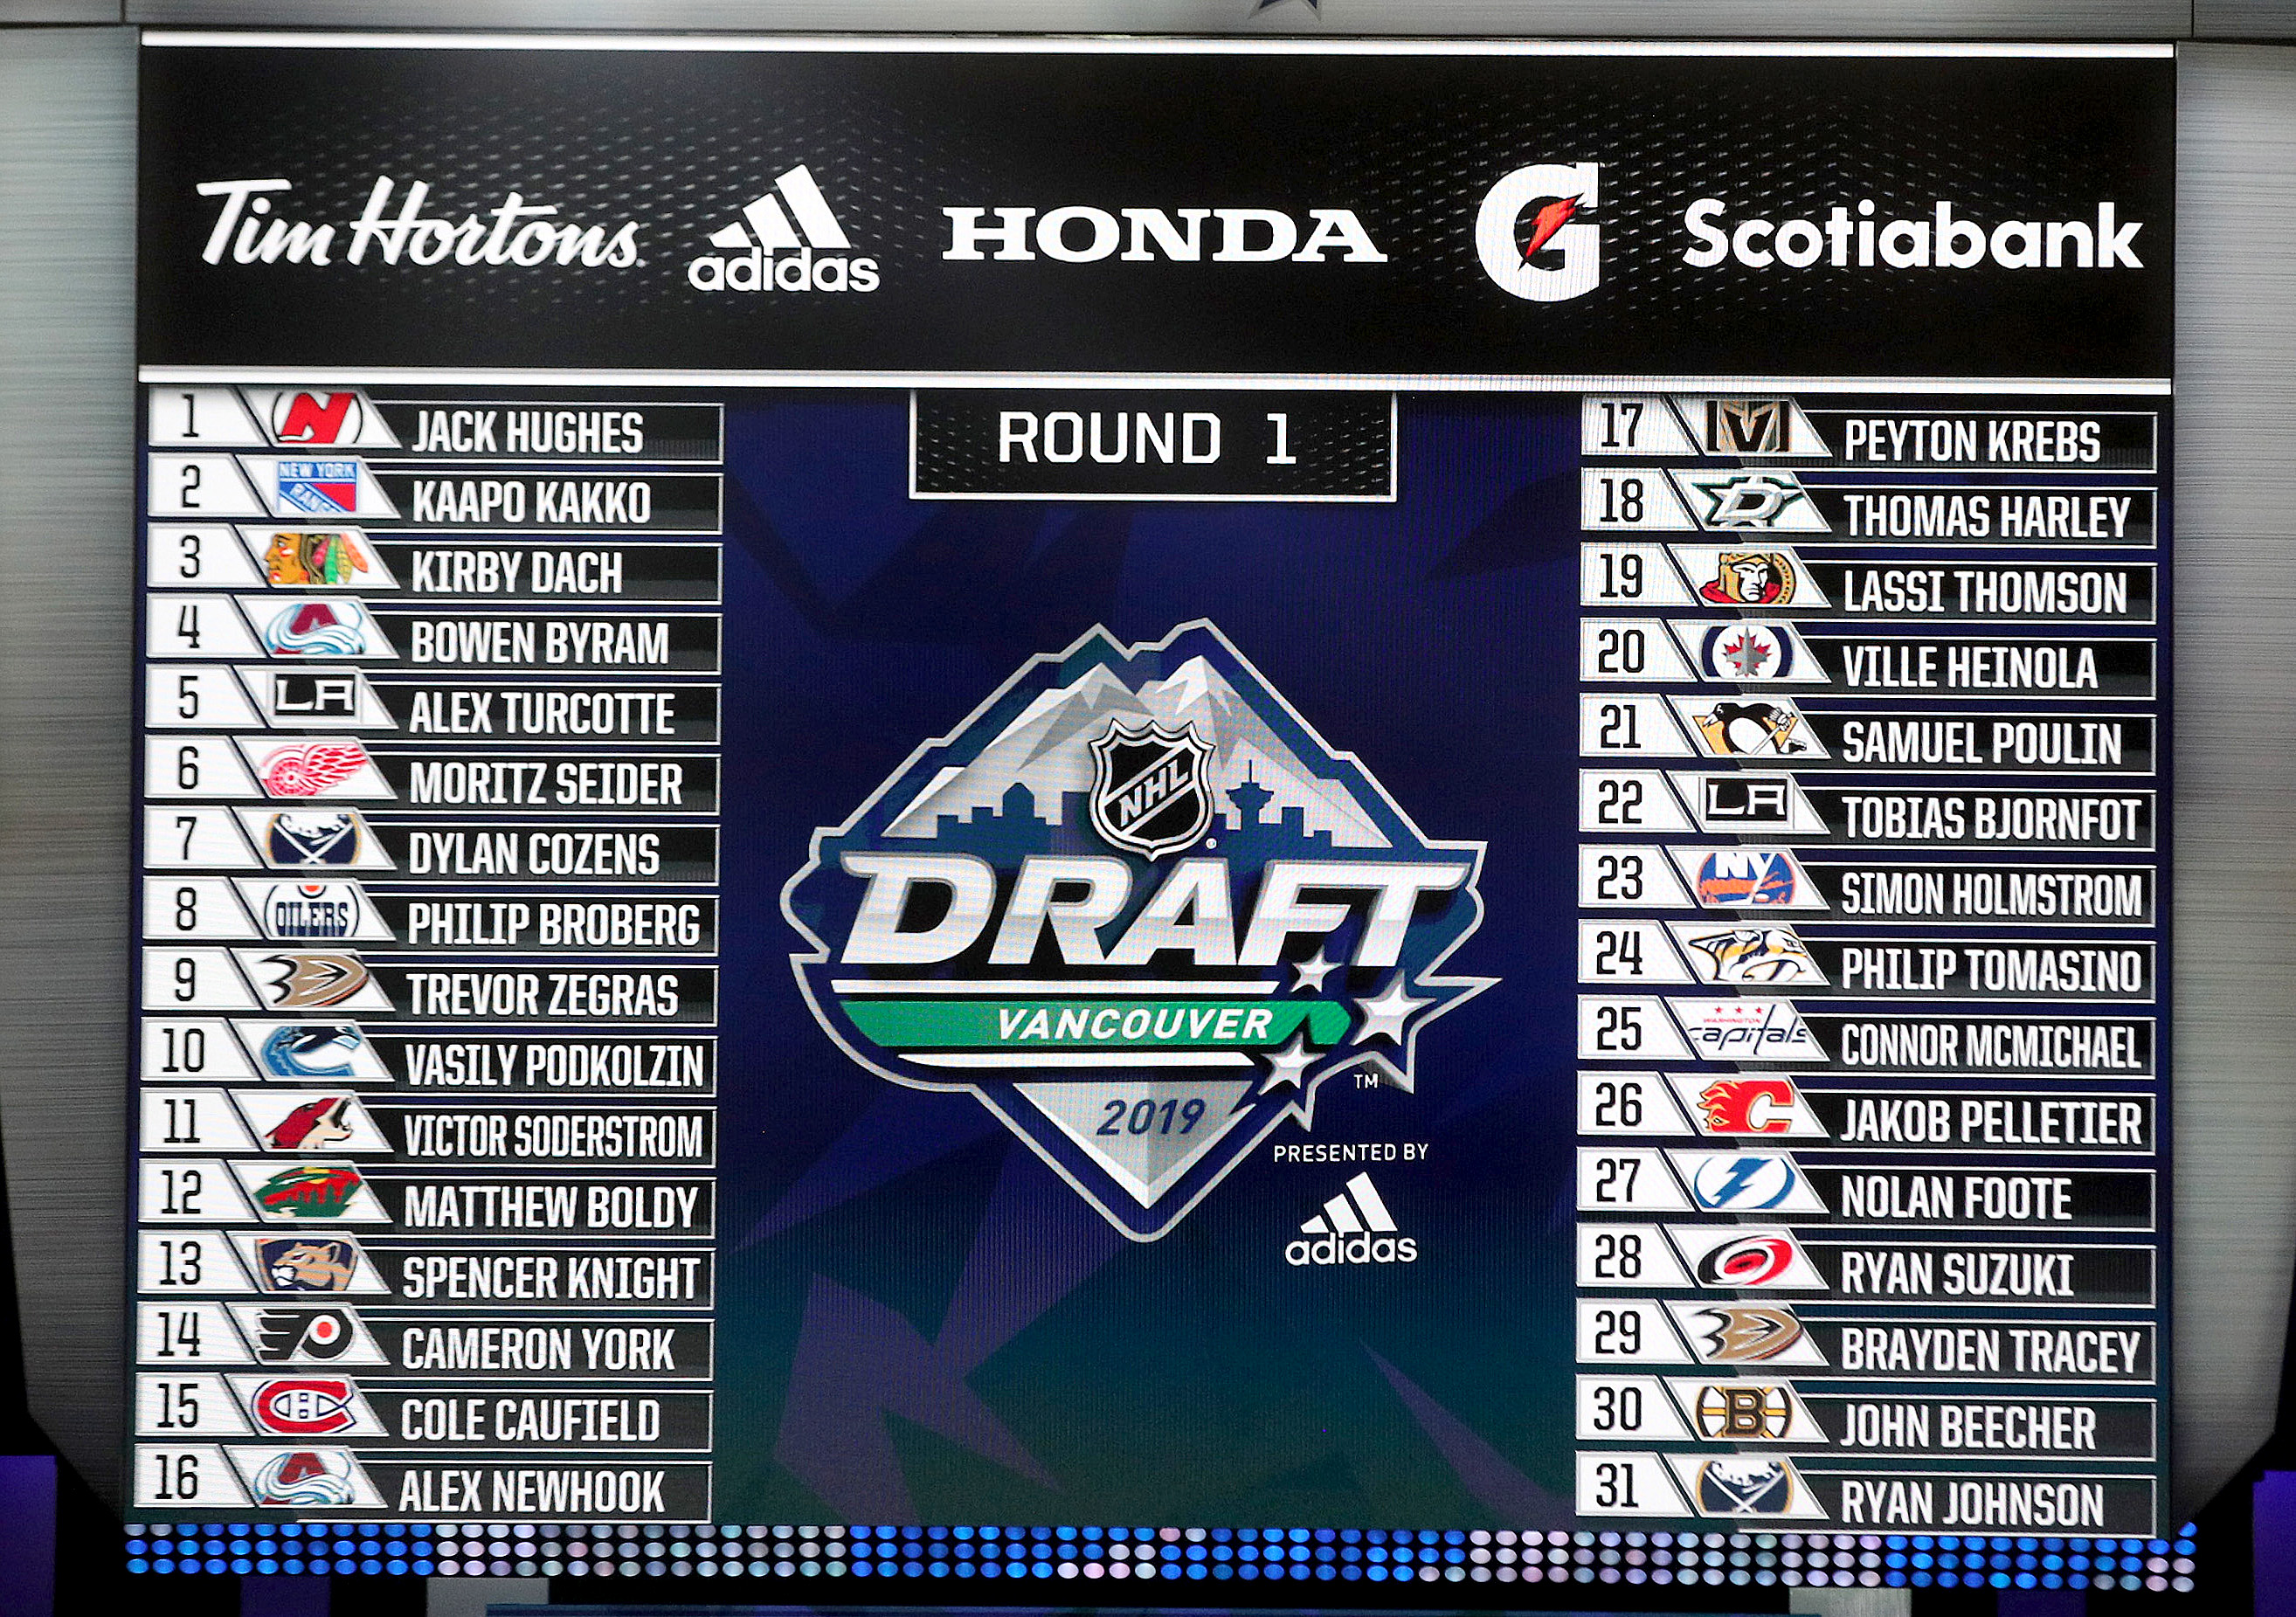 VANCOUVER, BRITISH COLUMBIA - JUNE 21: A detailed view of the Top 31 draft picks on the video board after the first round of the 2019 NHL Draft at Rogers Arena on June 21, 2019 in Vancouver, Canada.